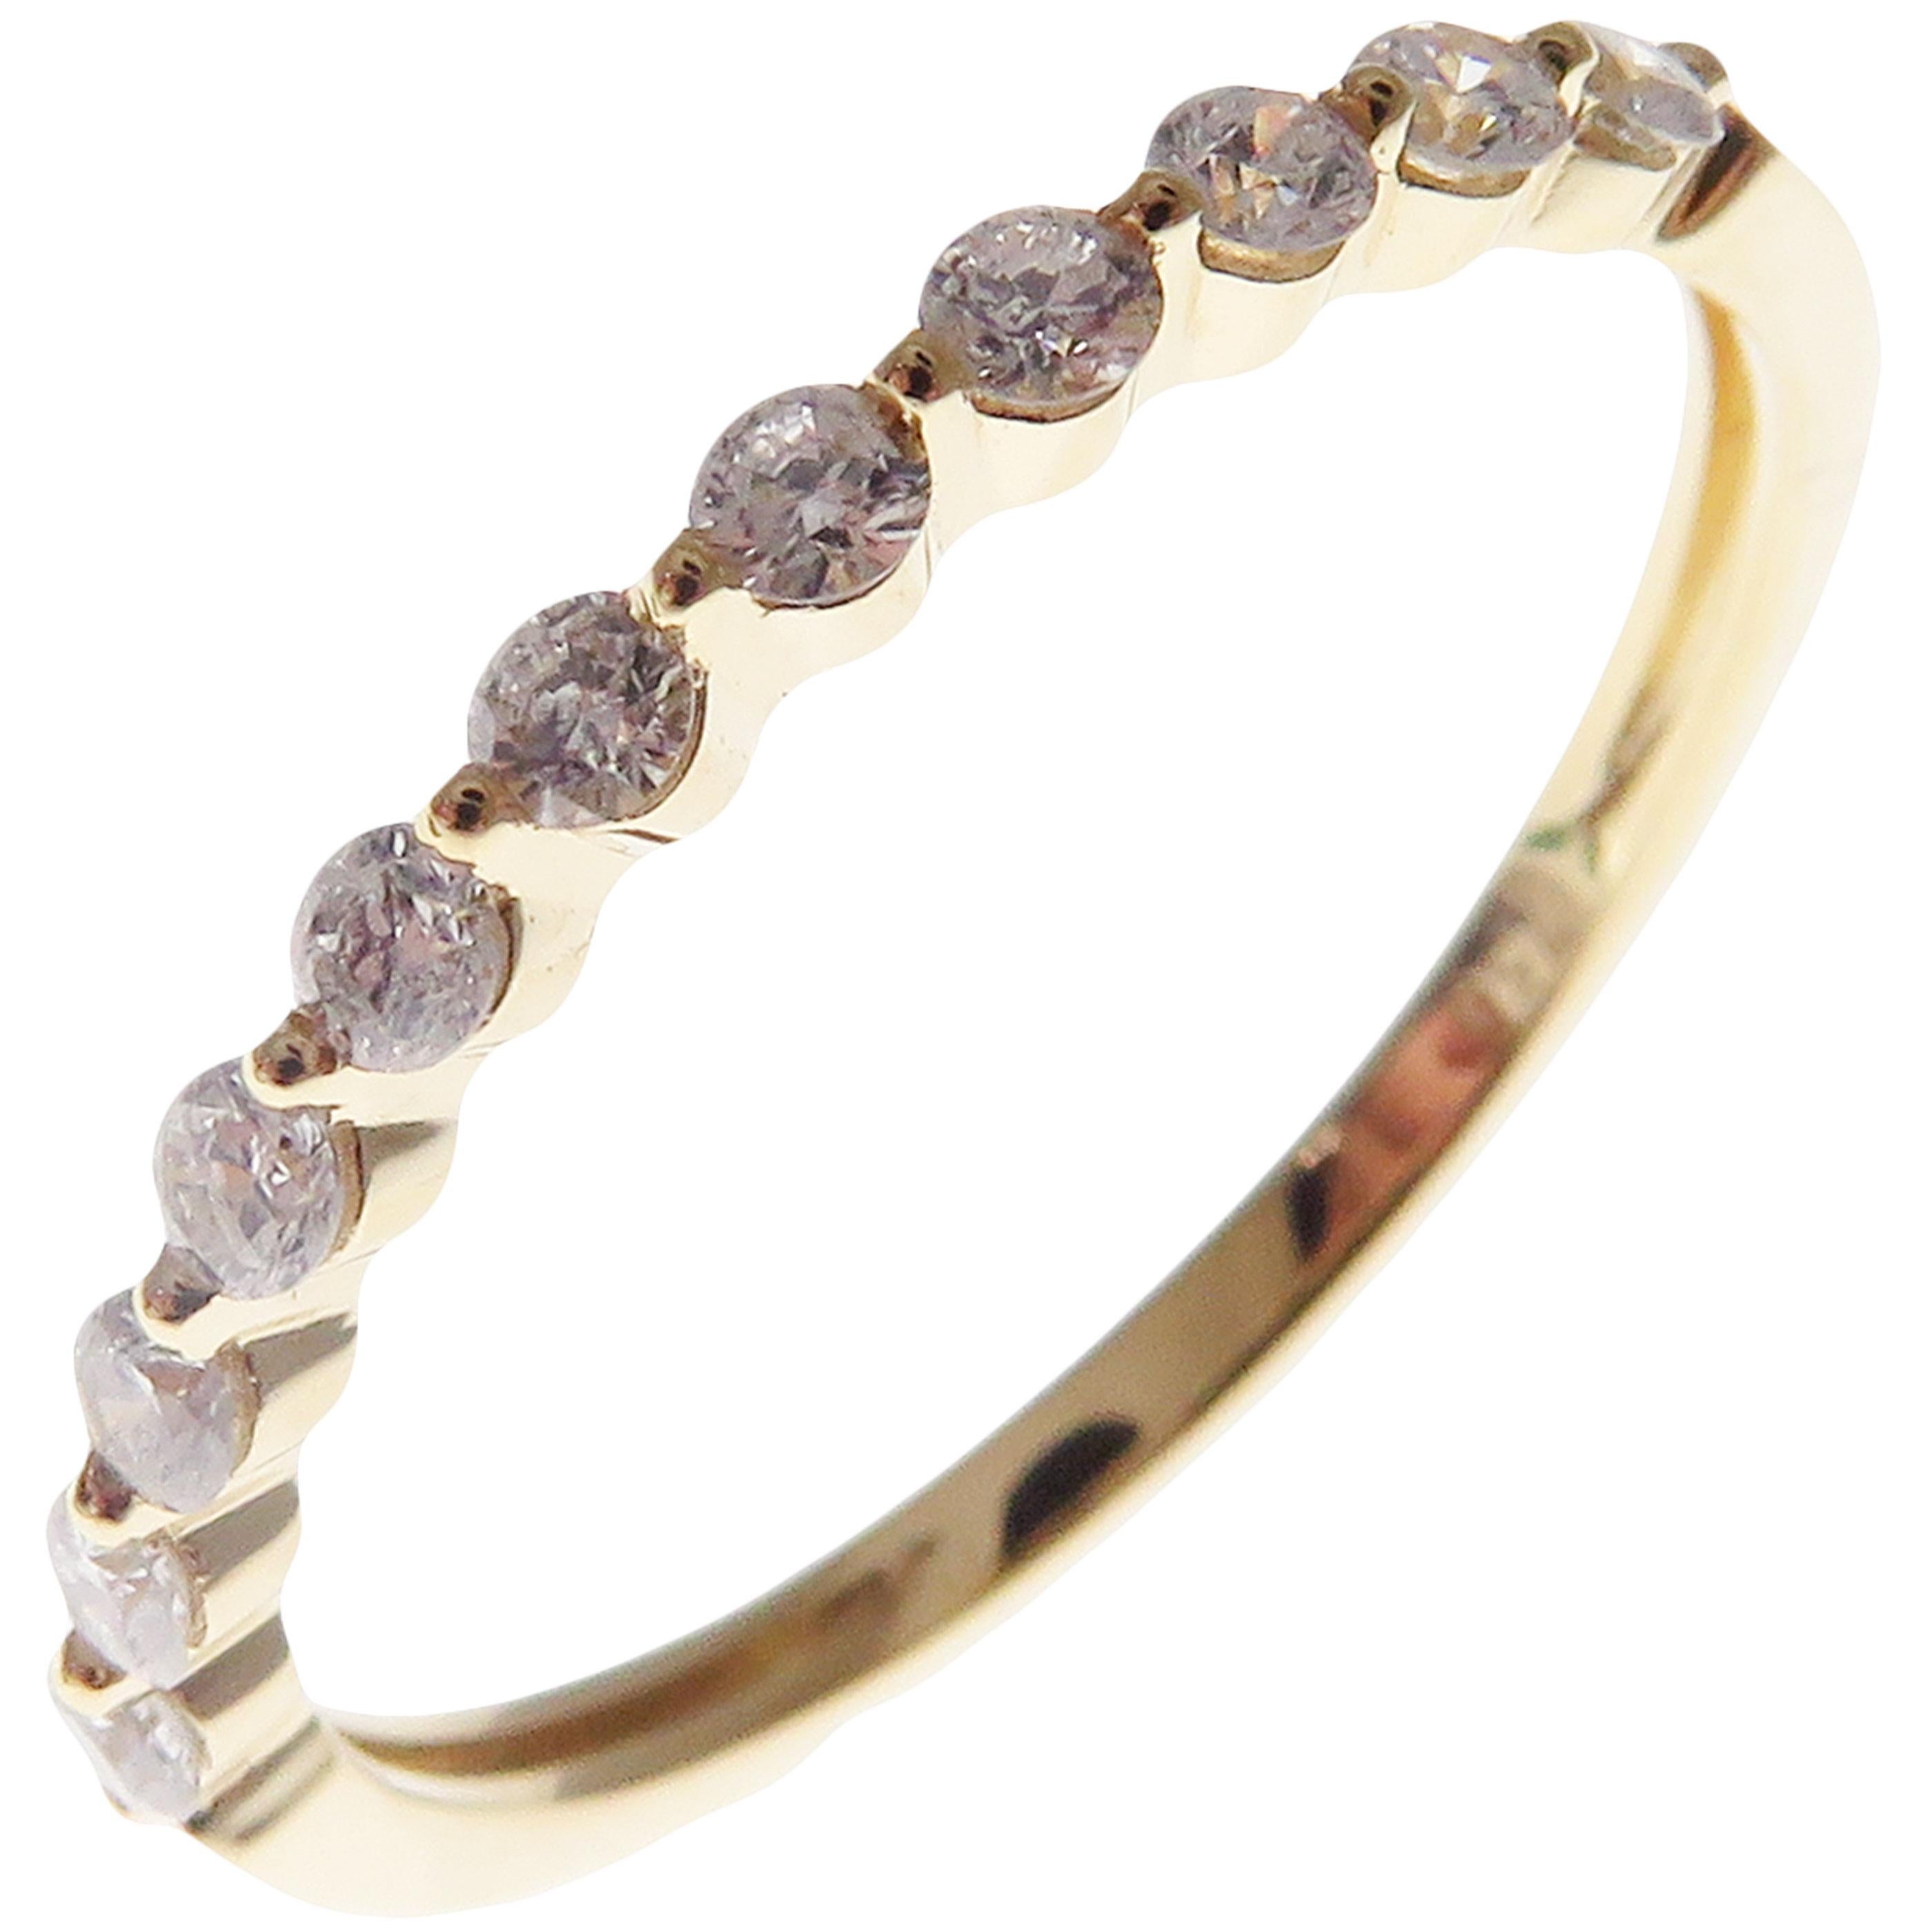 This simple stackable ring is crafted in 18-karat yellow gold, featuring 11 round white diamonds totaling of 0.31 carats.
Approximate total weight 2.25 grams.
Standard Ring size 7
SI-G Quality natural white diamonds.